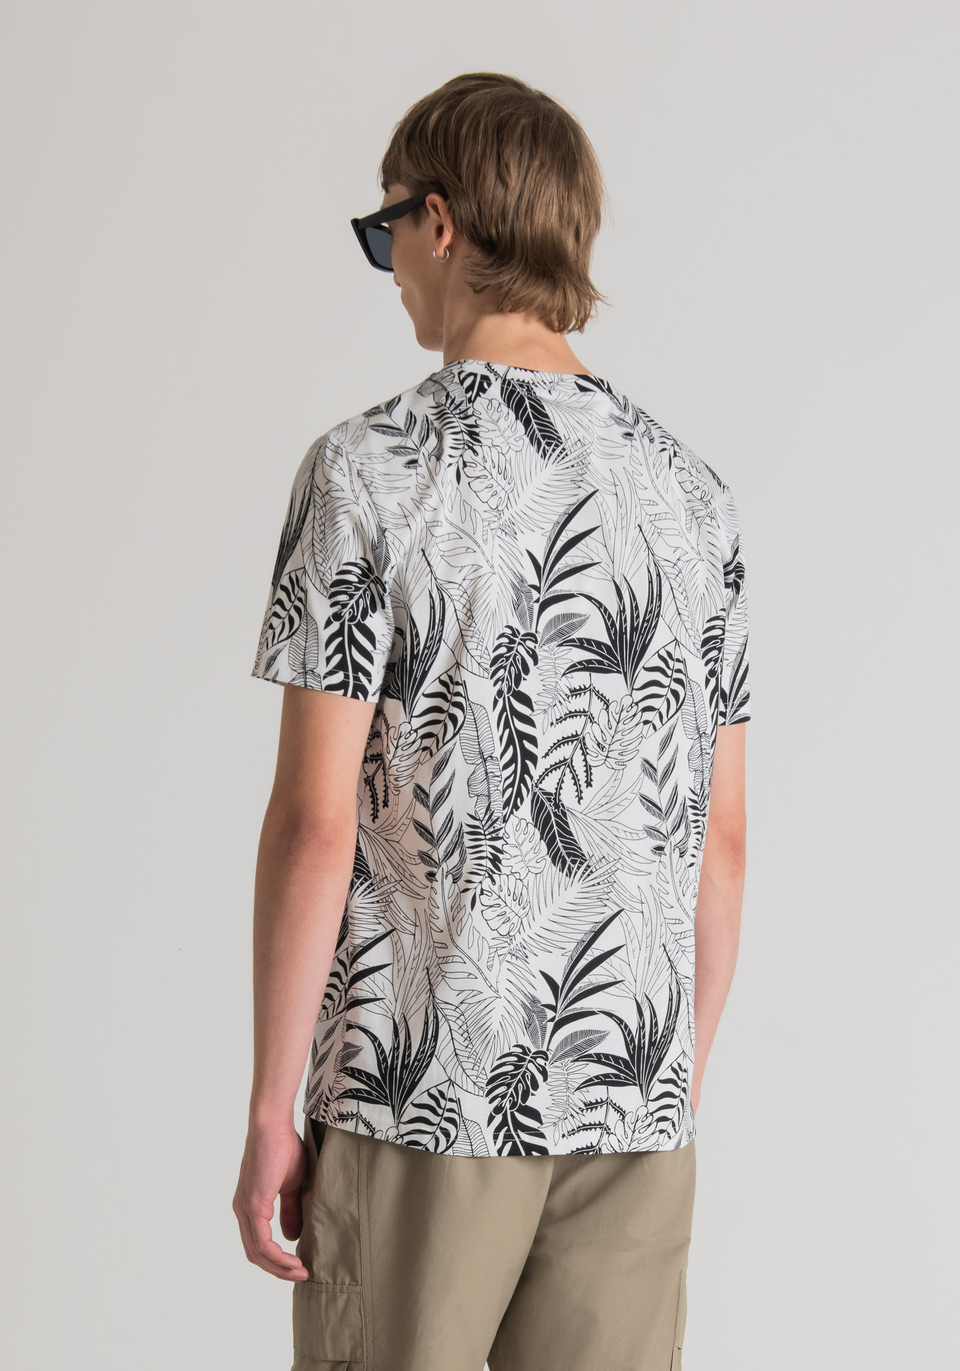 REGULAR-FIT T-SHIRT IN PURE COTTON WITH LOGO AND ALL-OVER JUNGLE PRINT - Antony Morato Online Shop